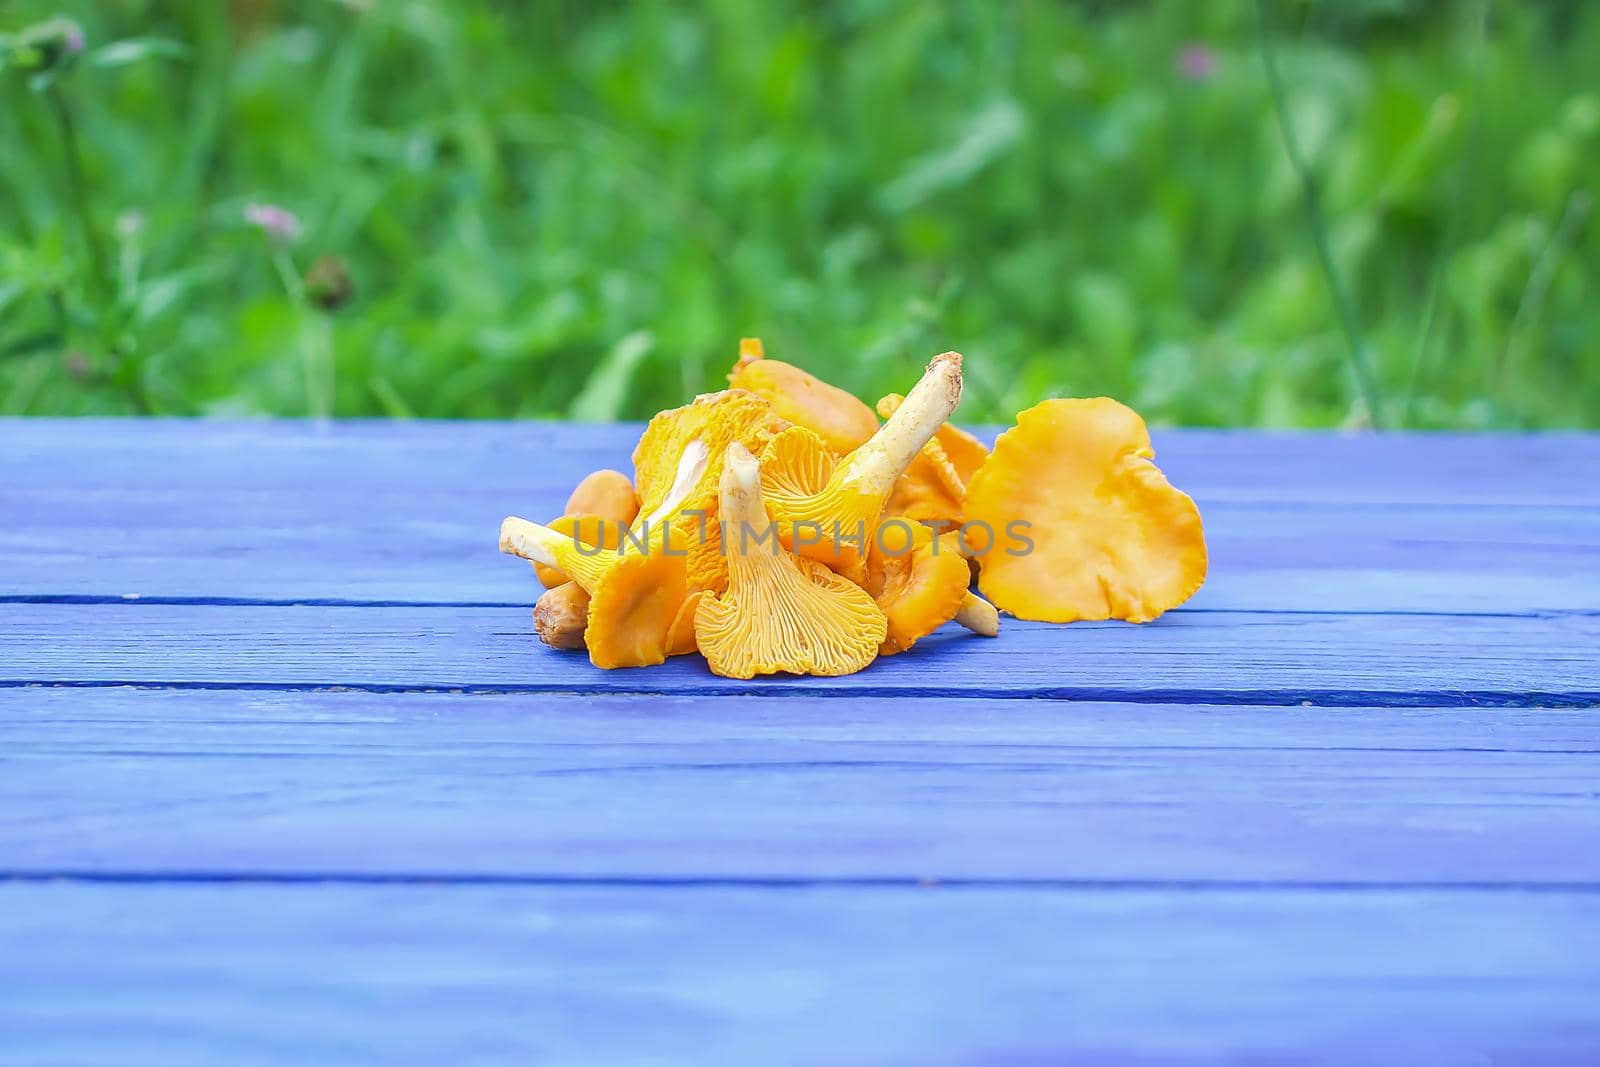 Cantharellus cibarius. Edible mushrooms on wooden surface. Golden chanterelle or girolle. by nightlyviolet